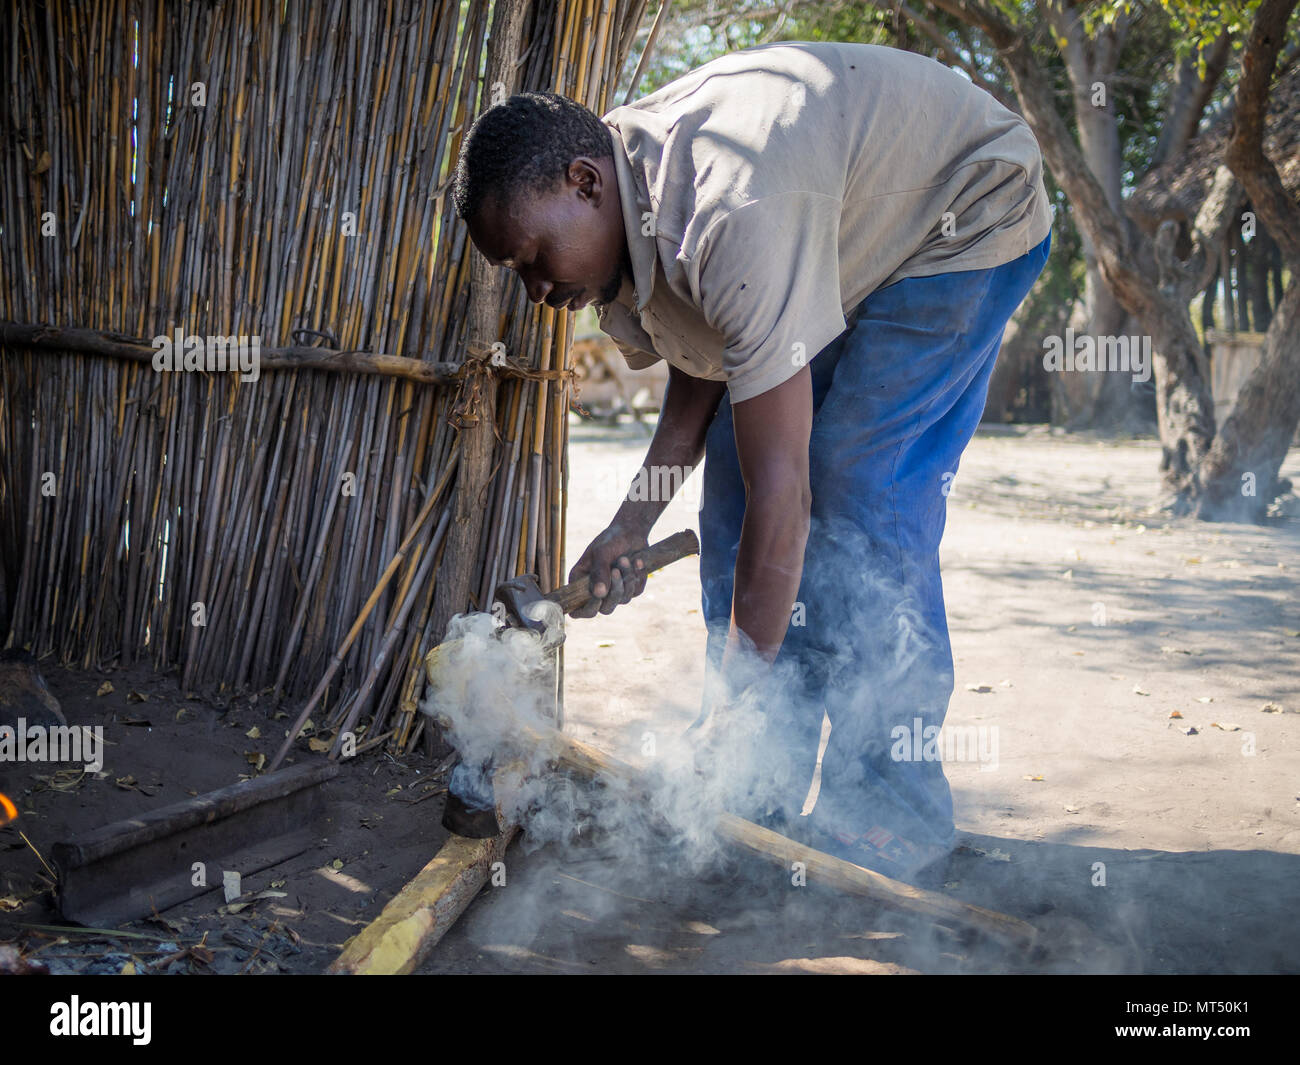 Luzibalule, Namibia - August 13, 2015: Unidentified African man operating traditional forge at Lizauli Traditional Village Stock Photo